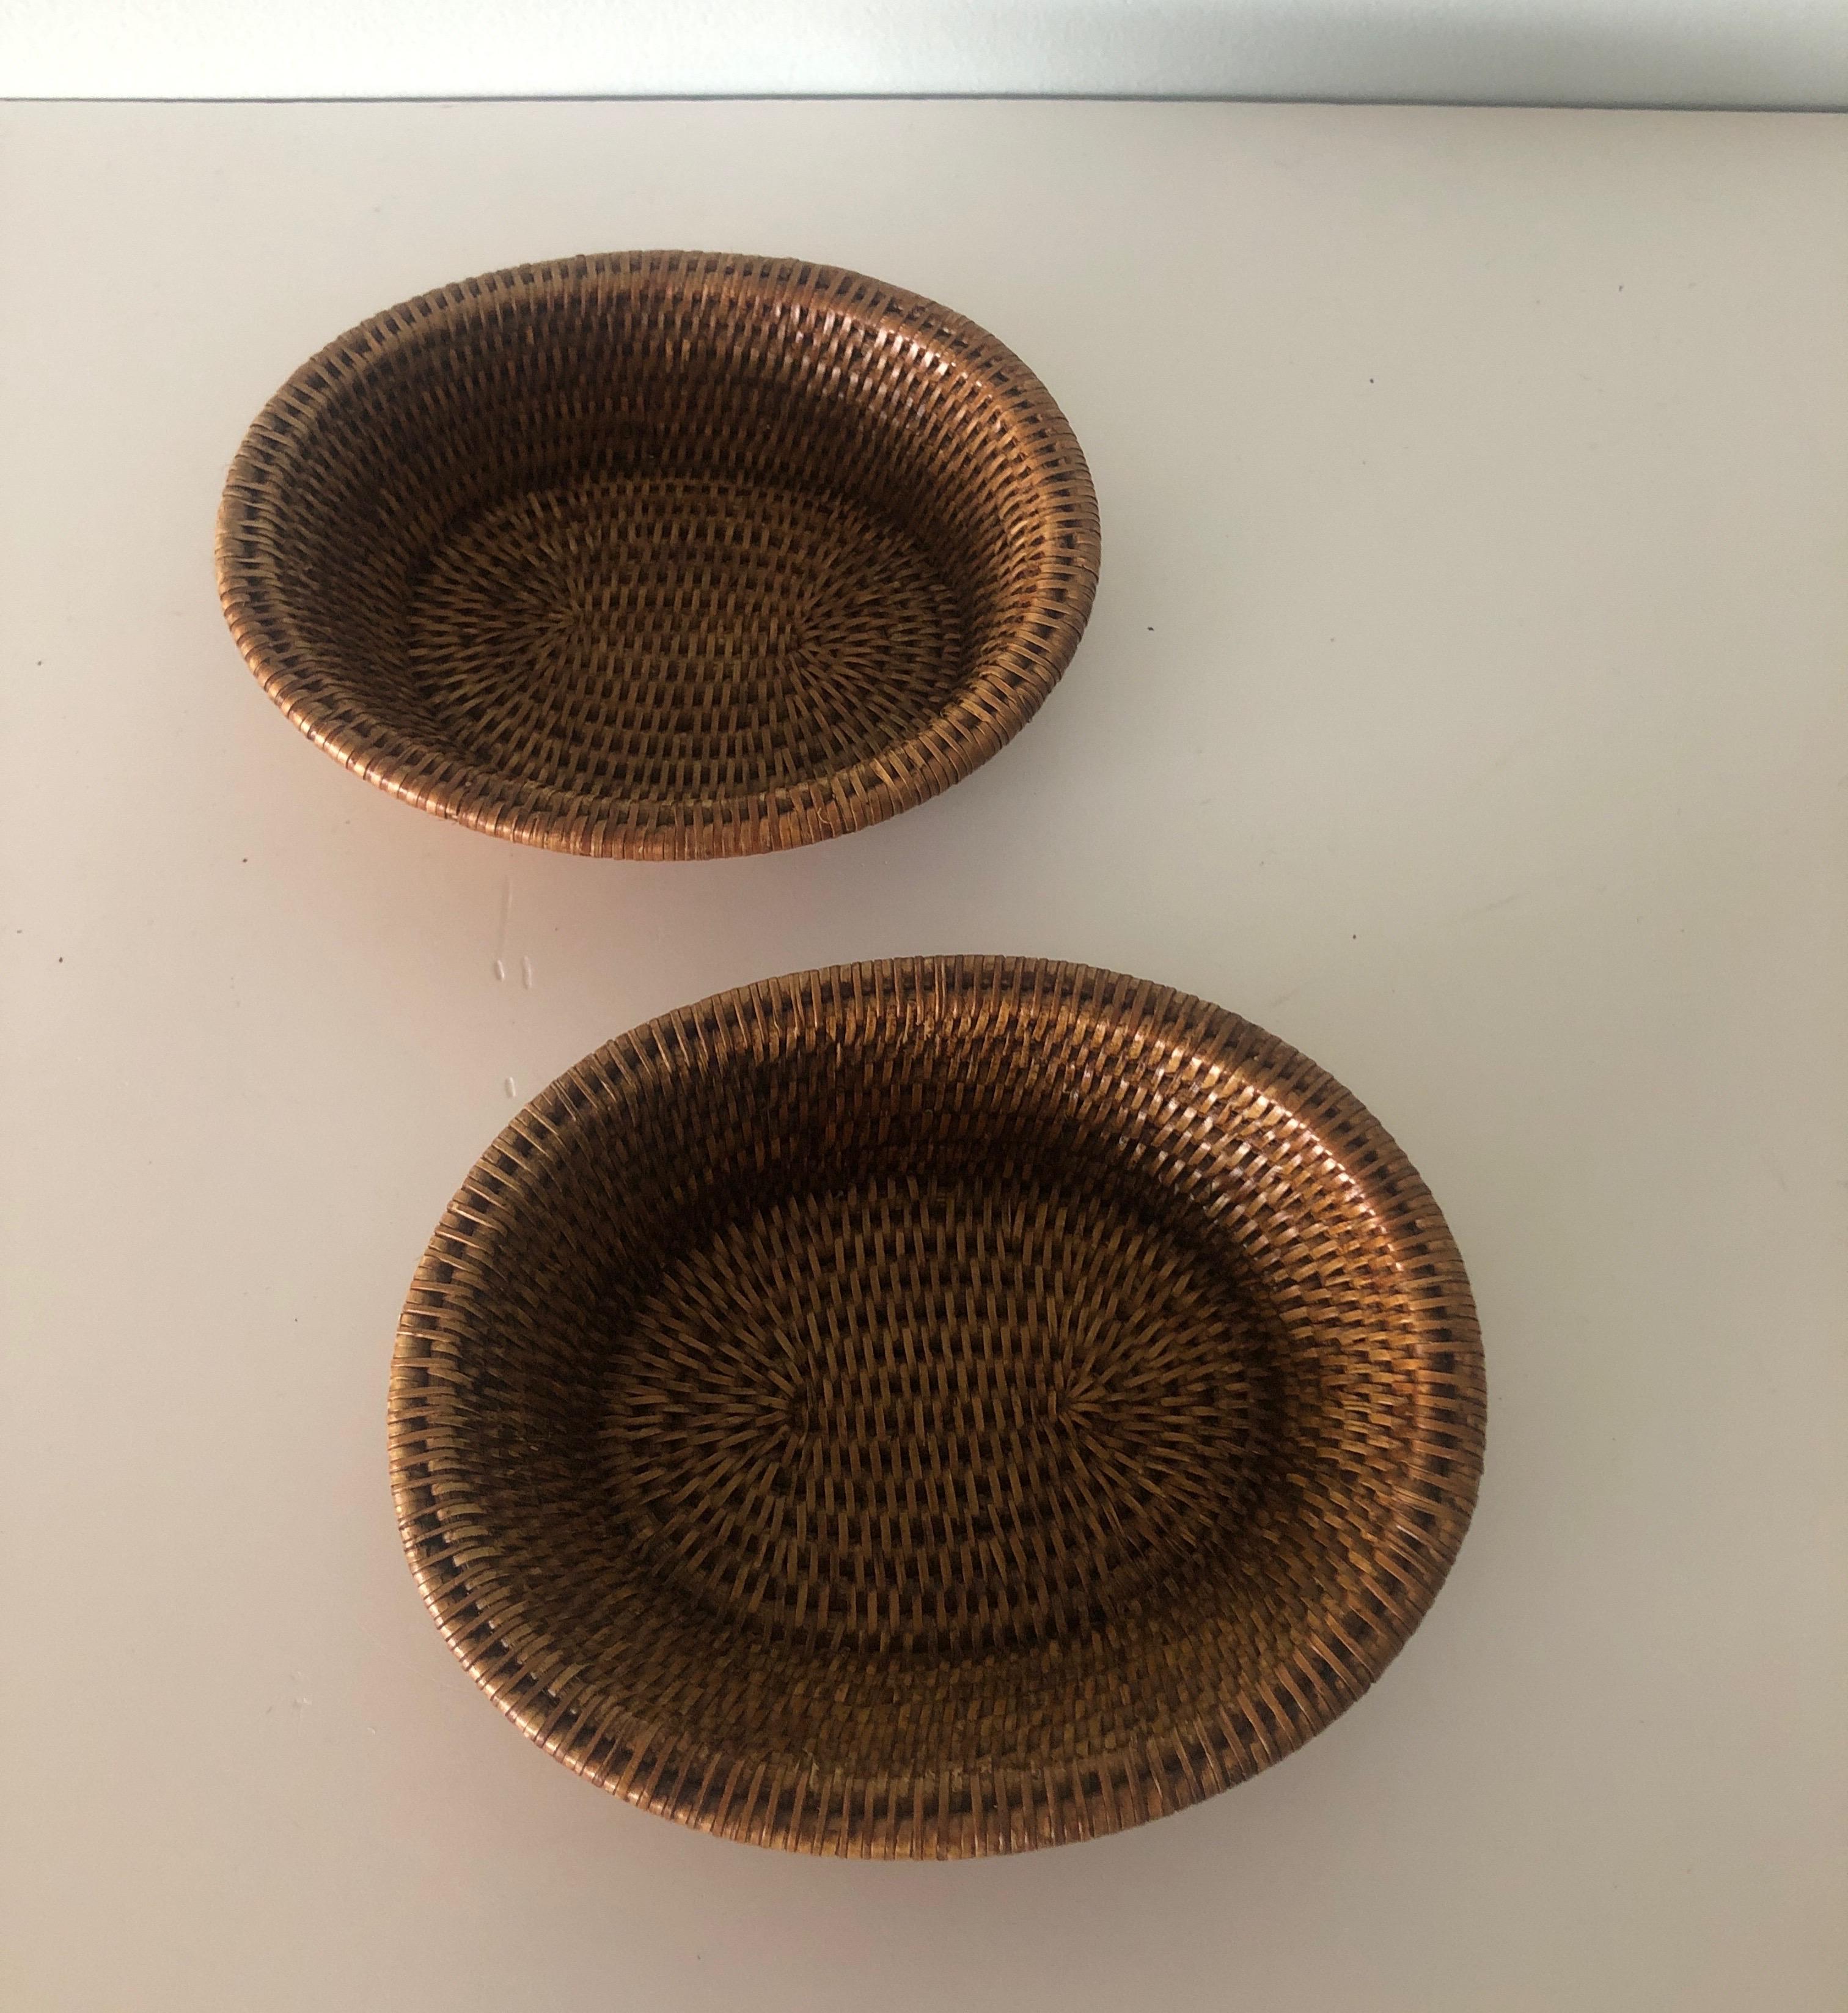 Set of (2) woven rattan oval baskets.
Size: 8.5